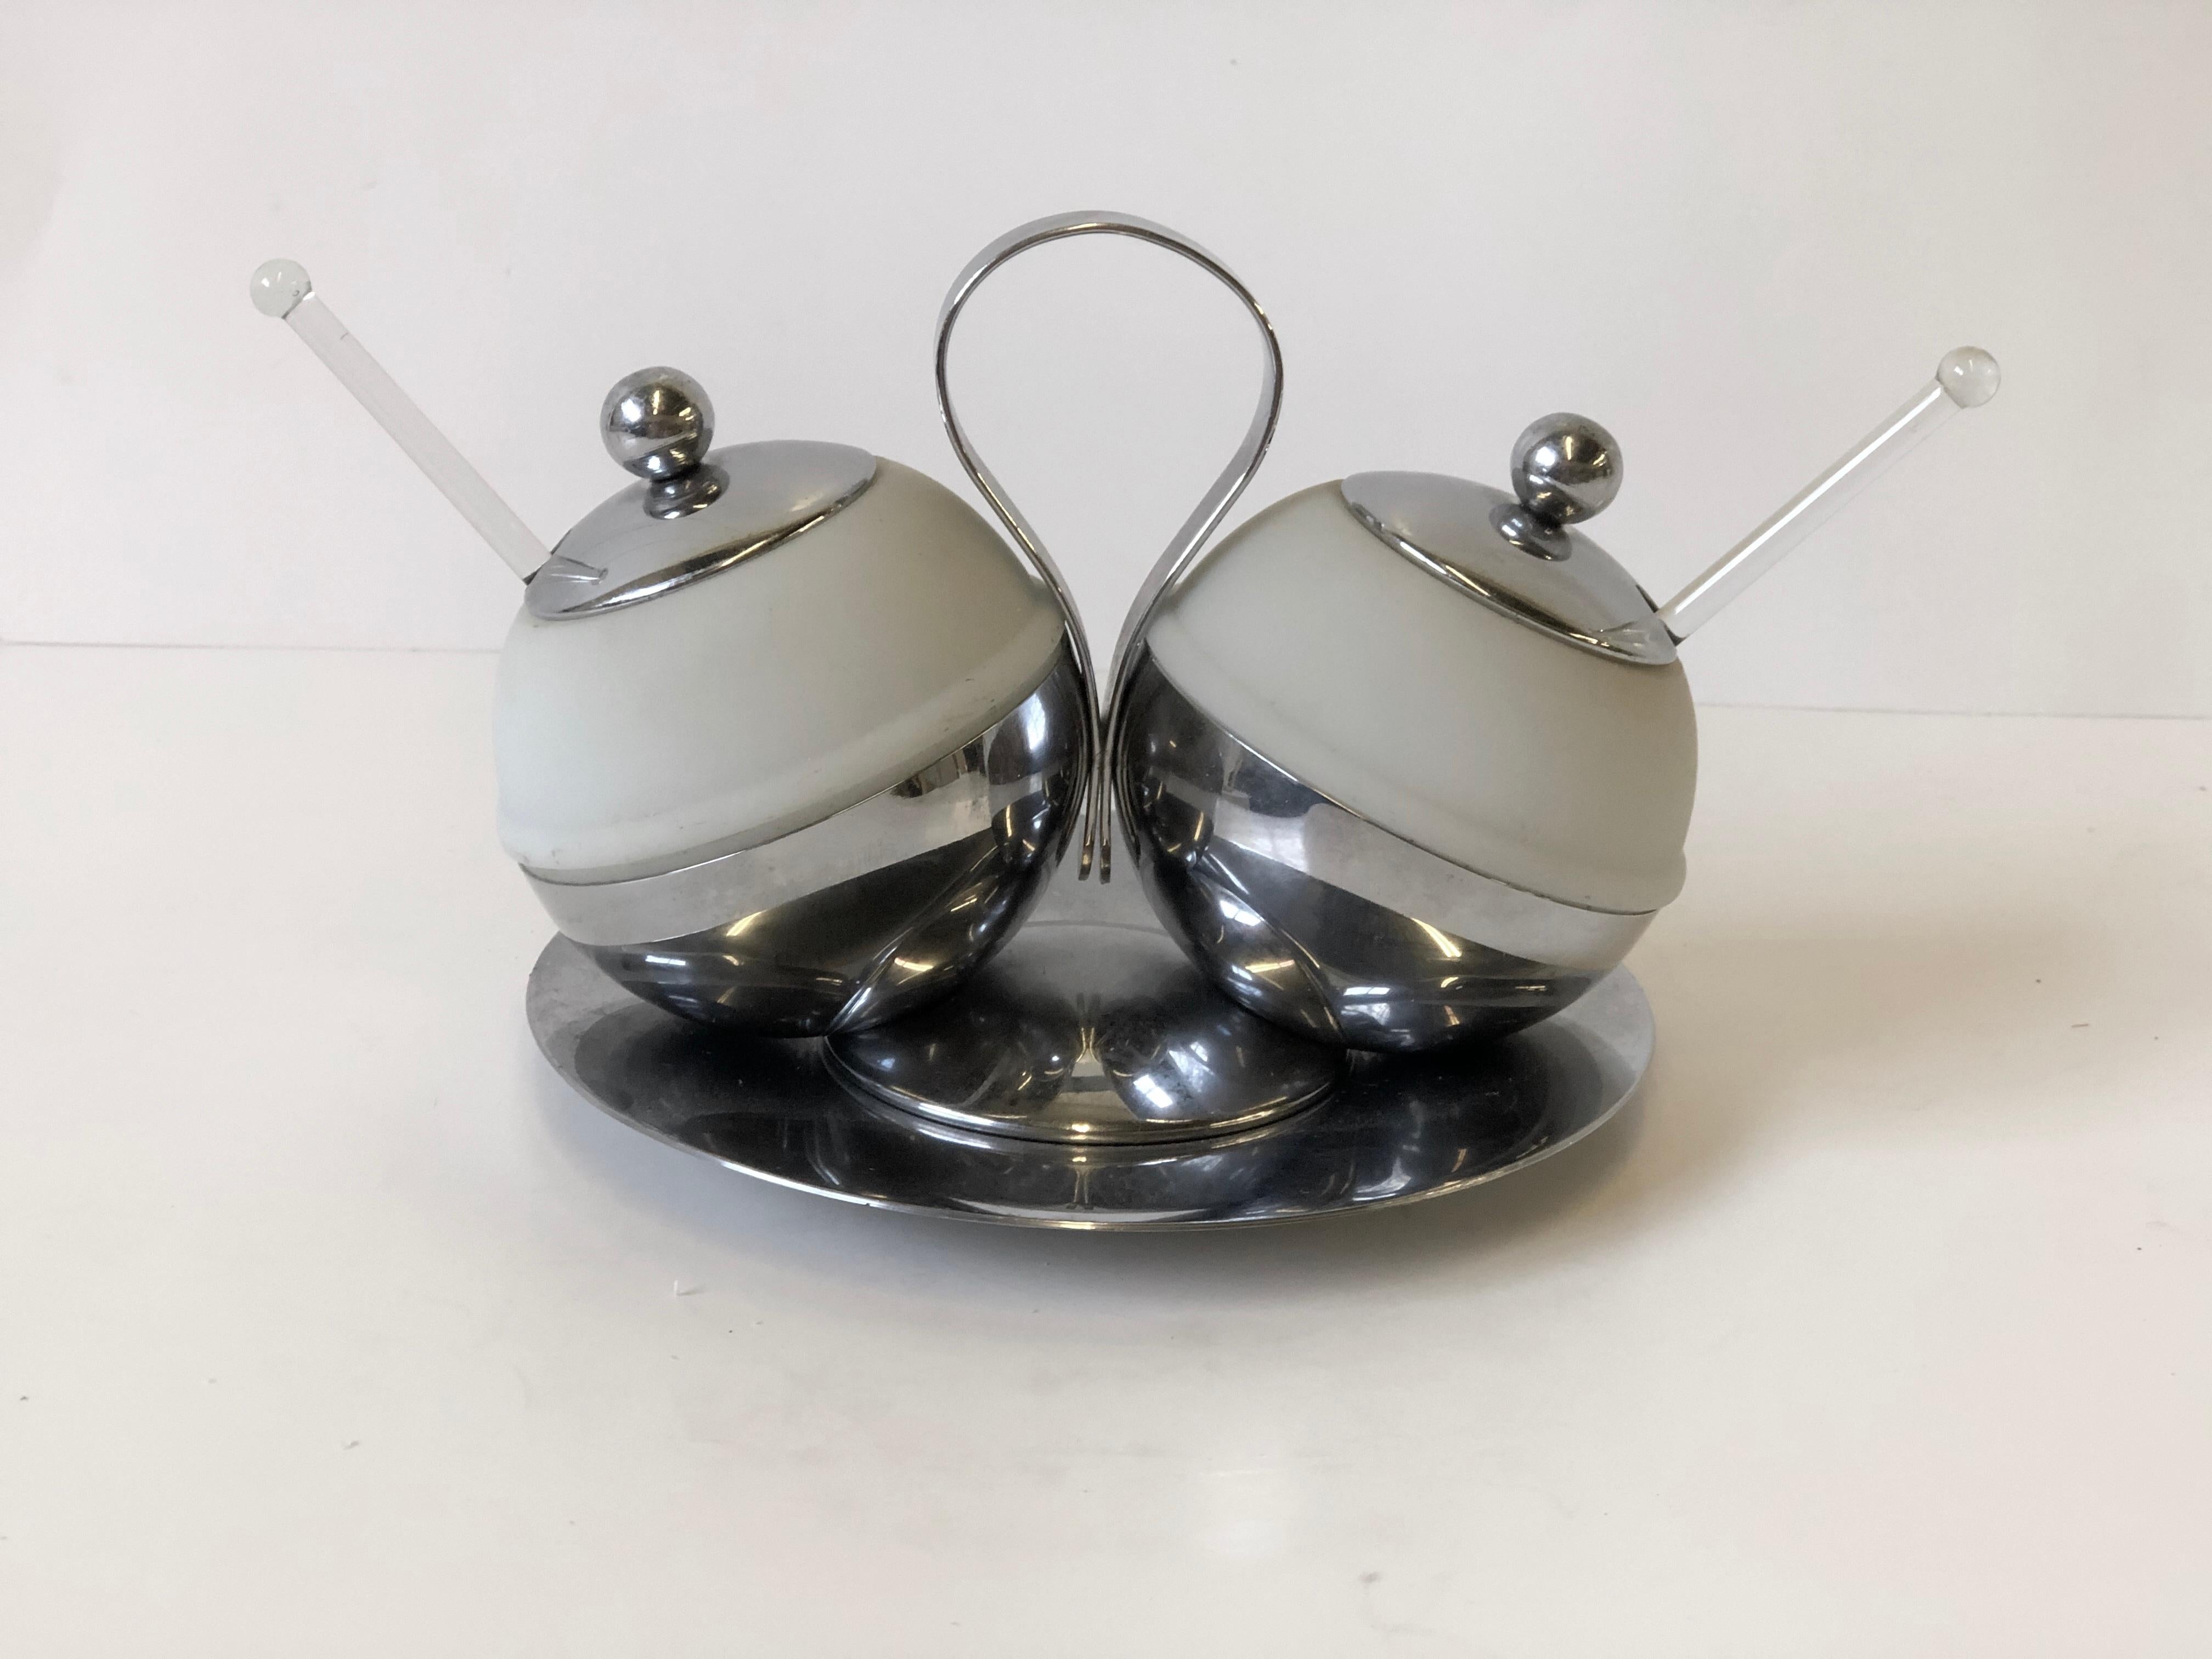 Rare 1930s Art Deco serving piece that could be used as a cream and sugar or salt and pepper set that is made of chrome and frosted glass. The set includes the lidded double server on stand, a plate rest, and a pair of glass spoons. The set was made